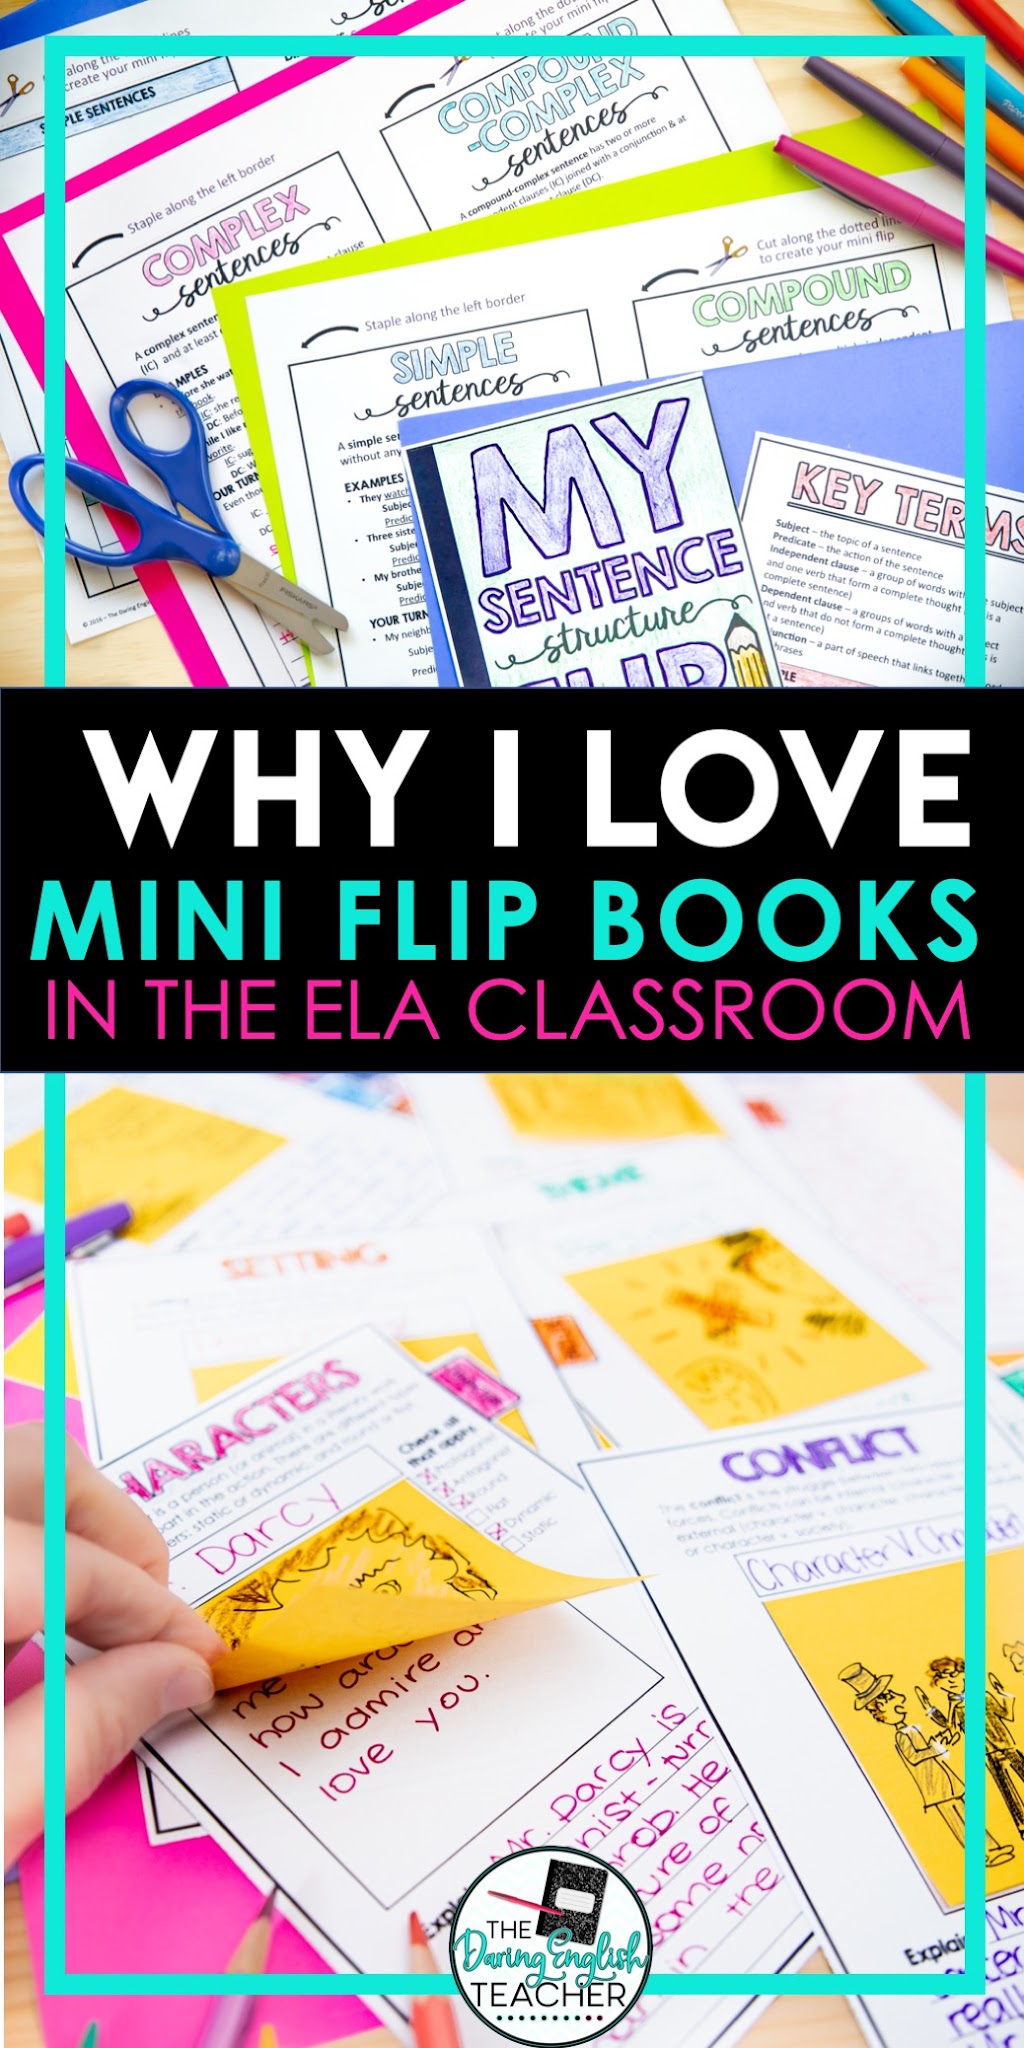 Why I Love Assigning Mini Flip Books in the Secondary ELA Classroom